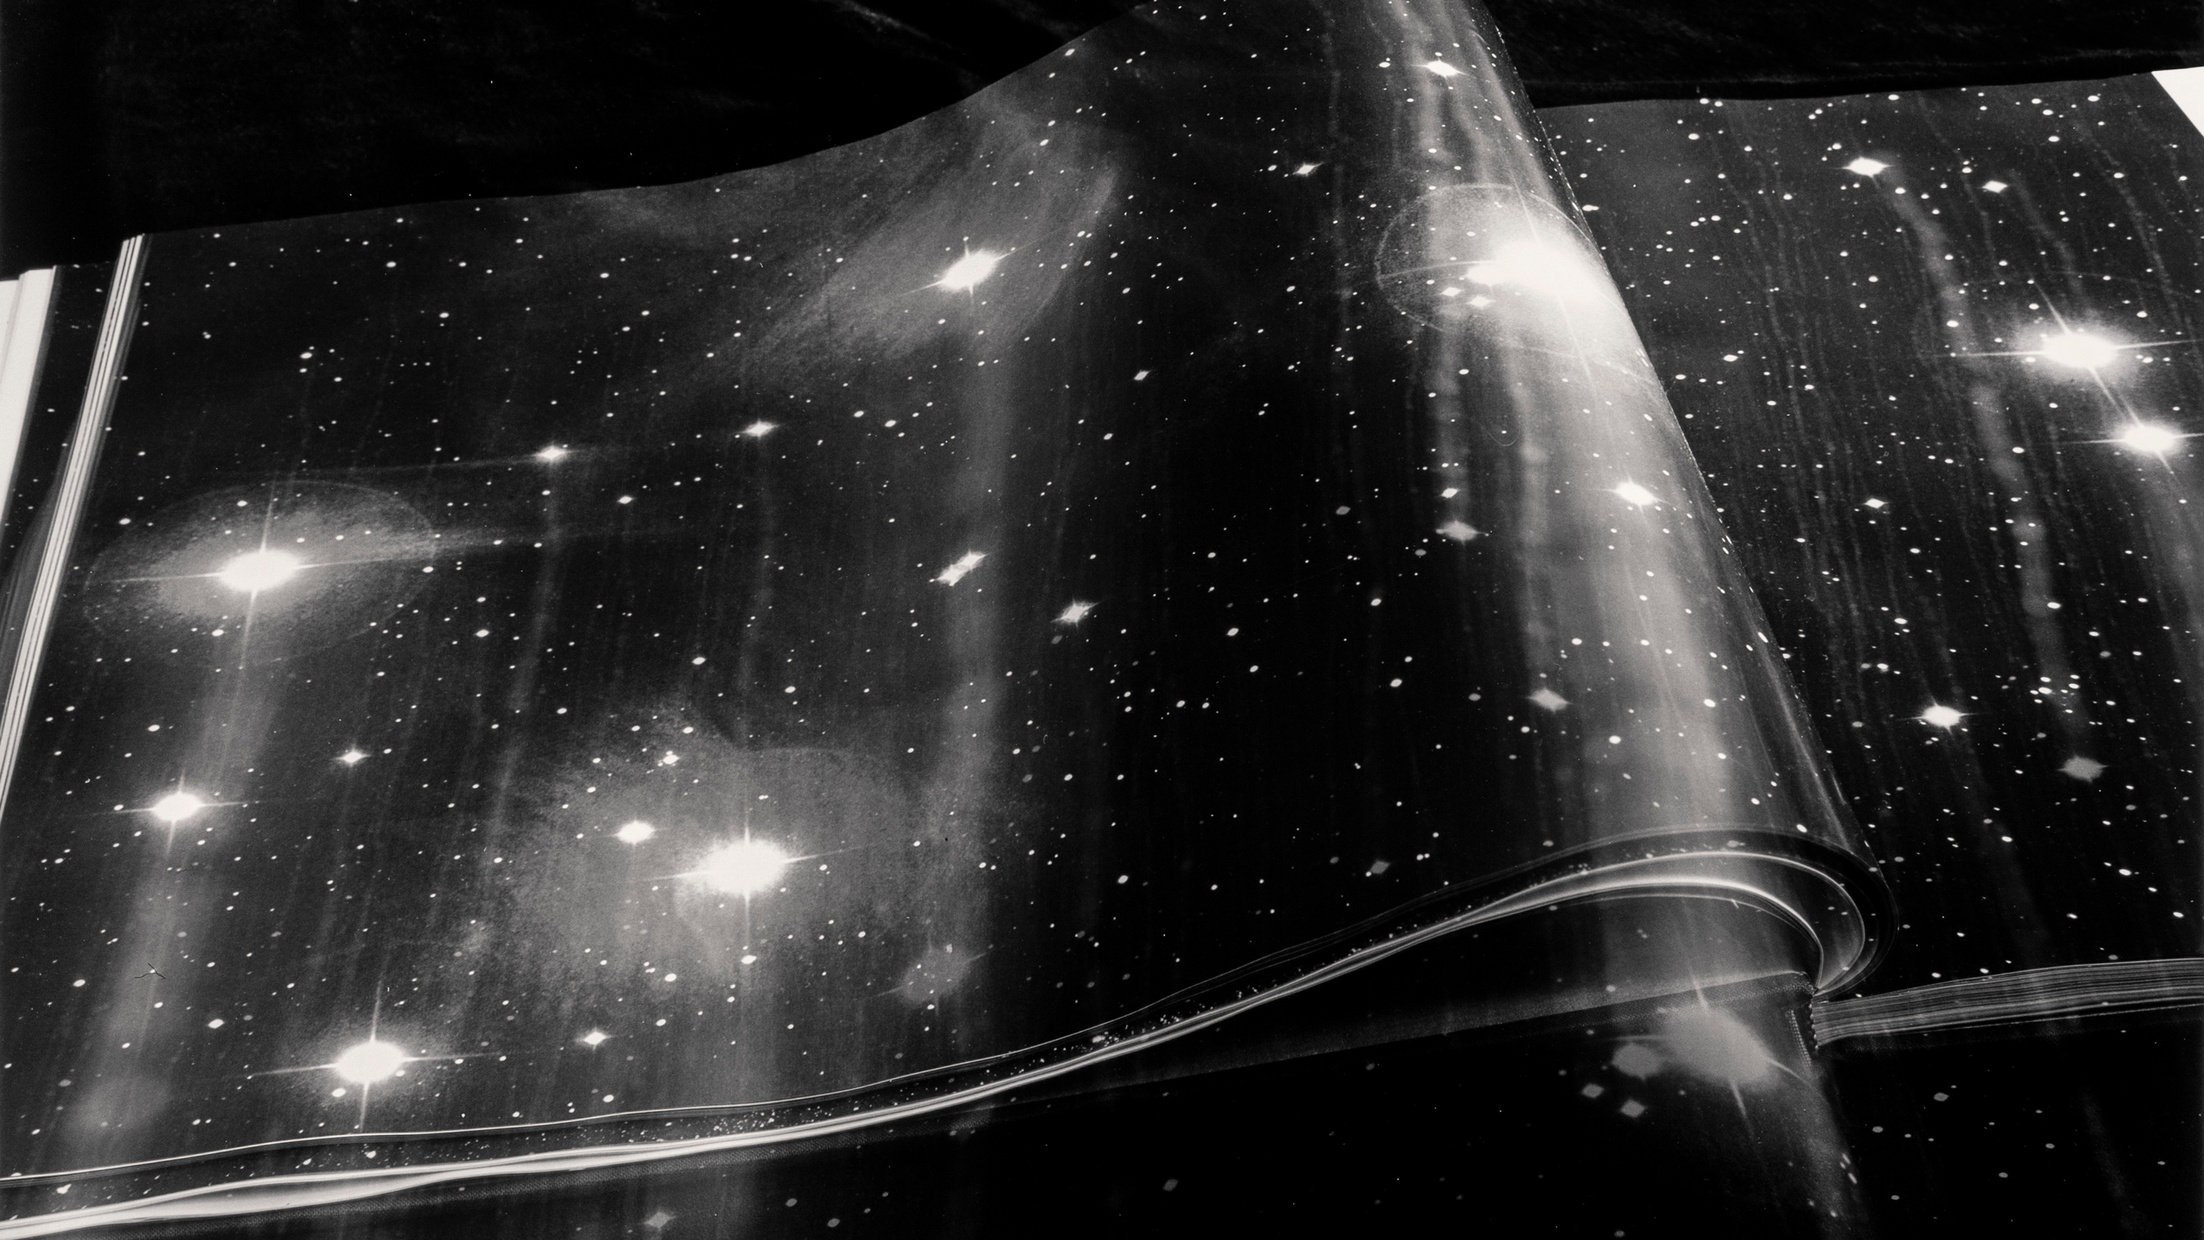 A black and white photograph with sparkling stars and an open book with galaxy printed pages.